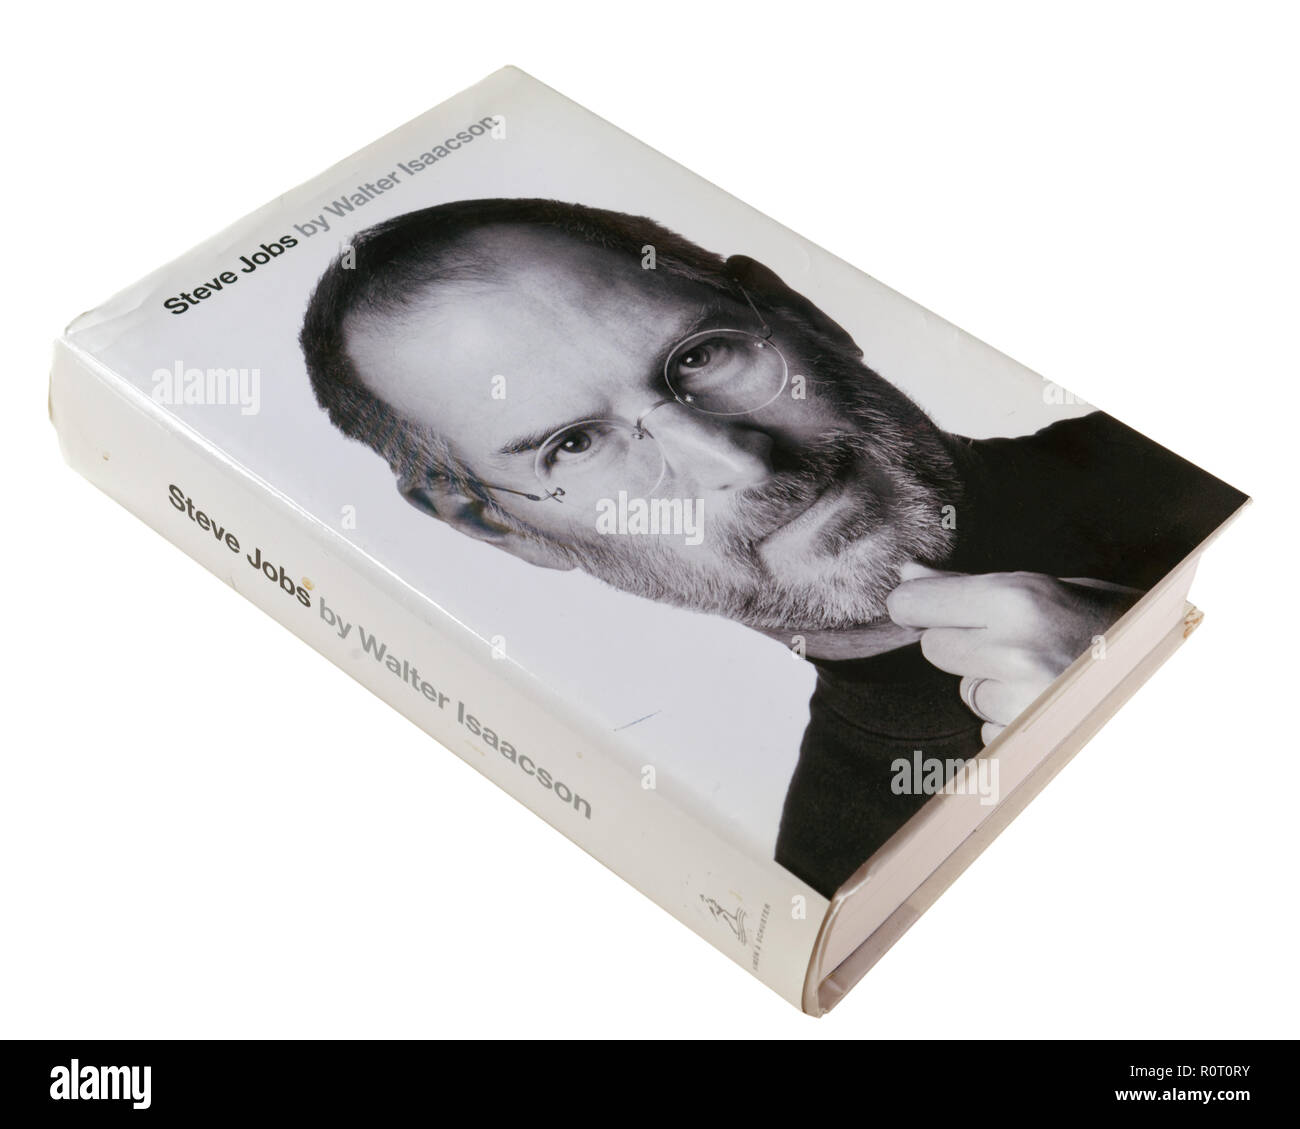 Steve Jobs biography by Walter Isaacson Stock Photo